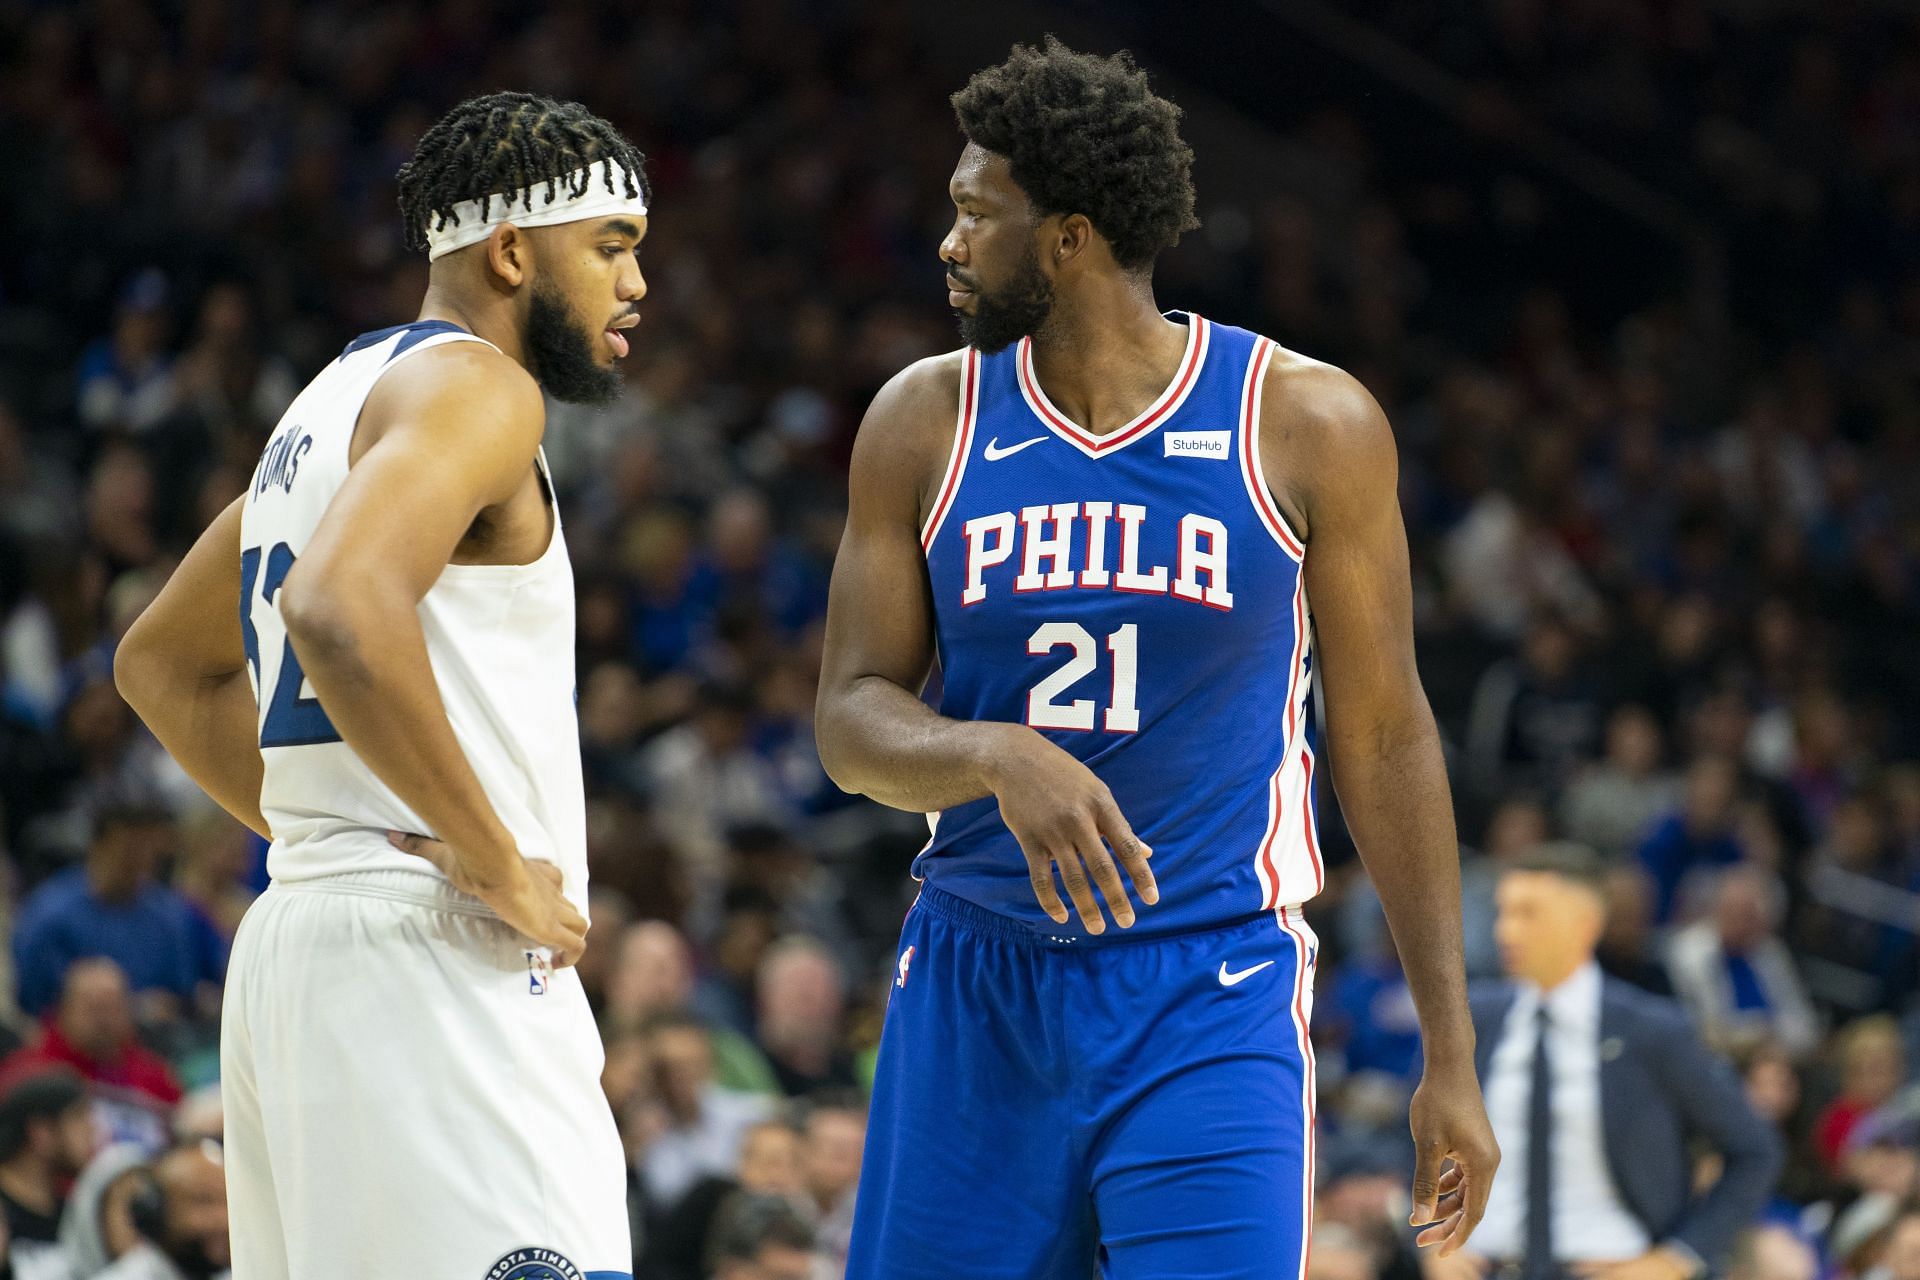 Karl-Anthony Towns #32 of the Minnesota Timberwolves and Joel Embiid #21 of the Philadelphia 76ers. 